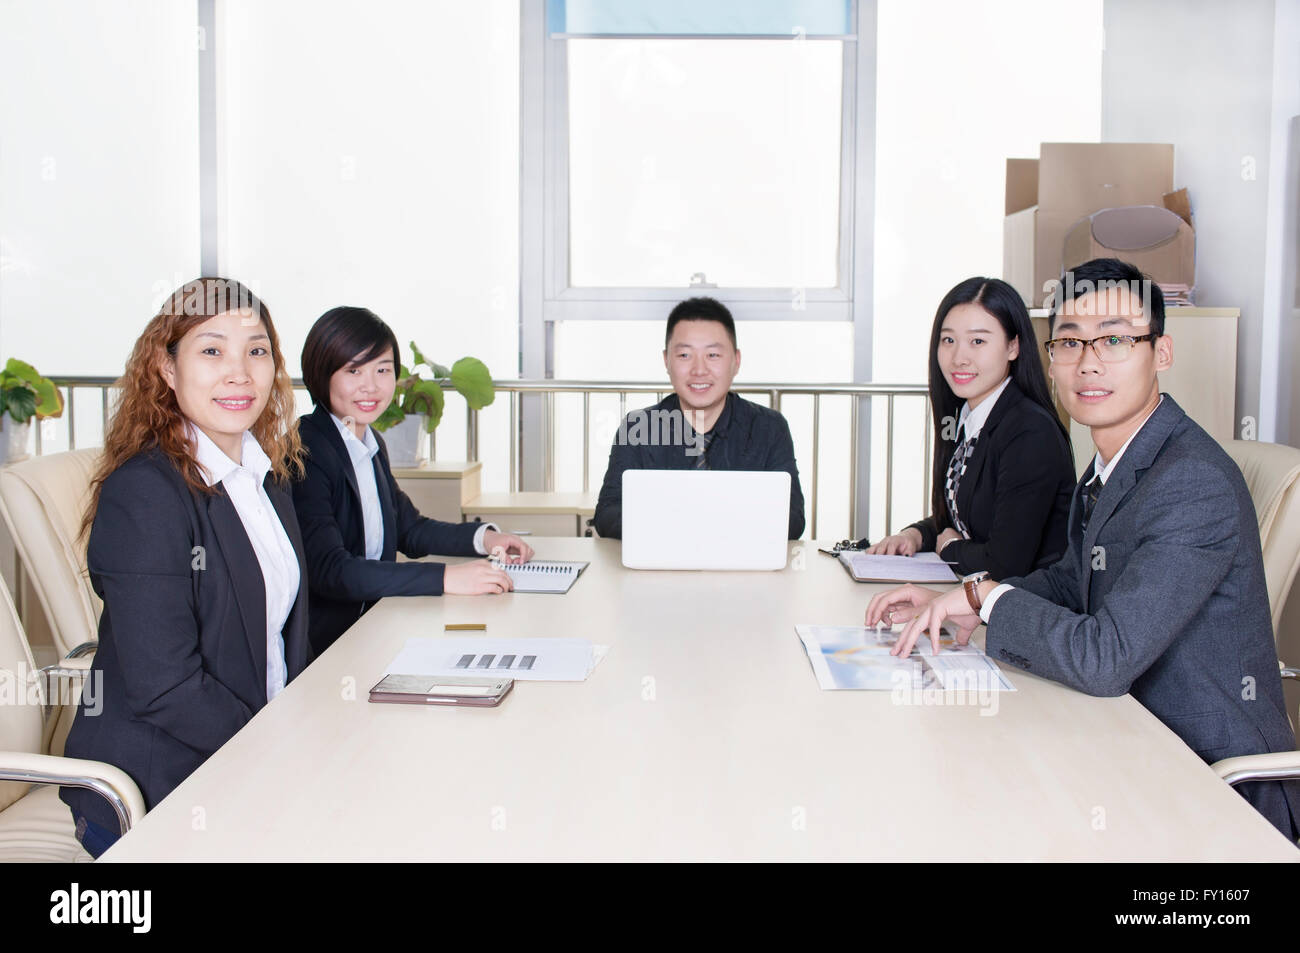 Group in Asian business people a meeting Business Stock Photo